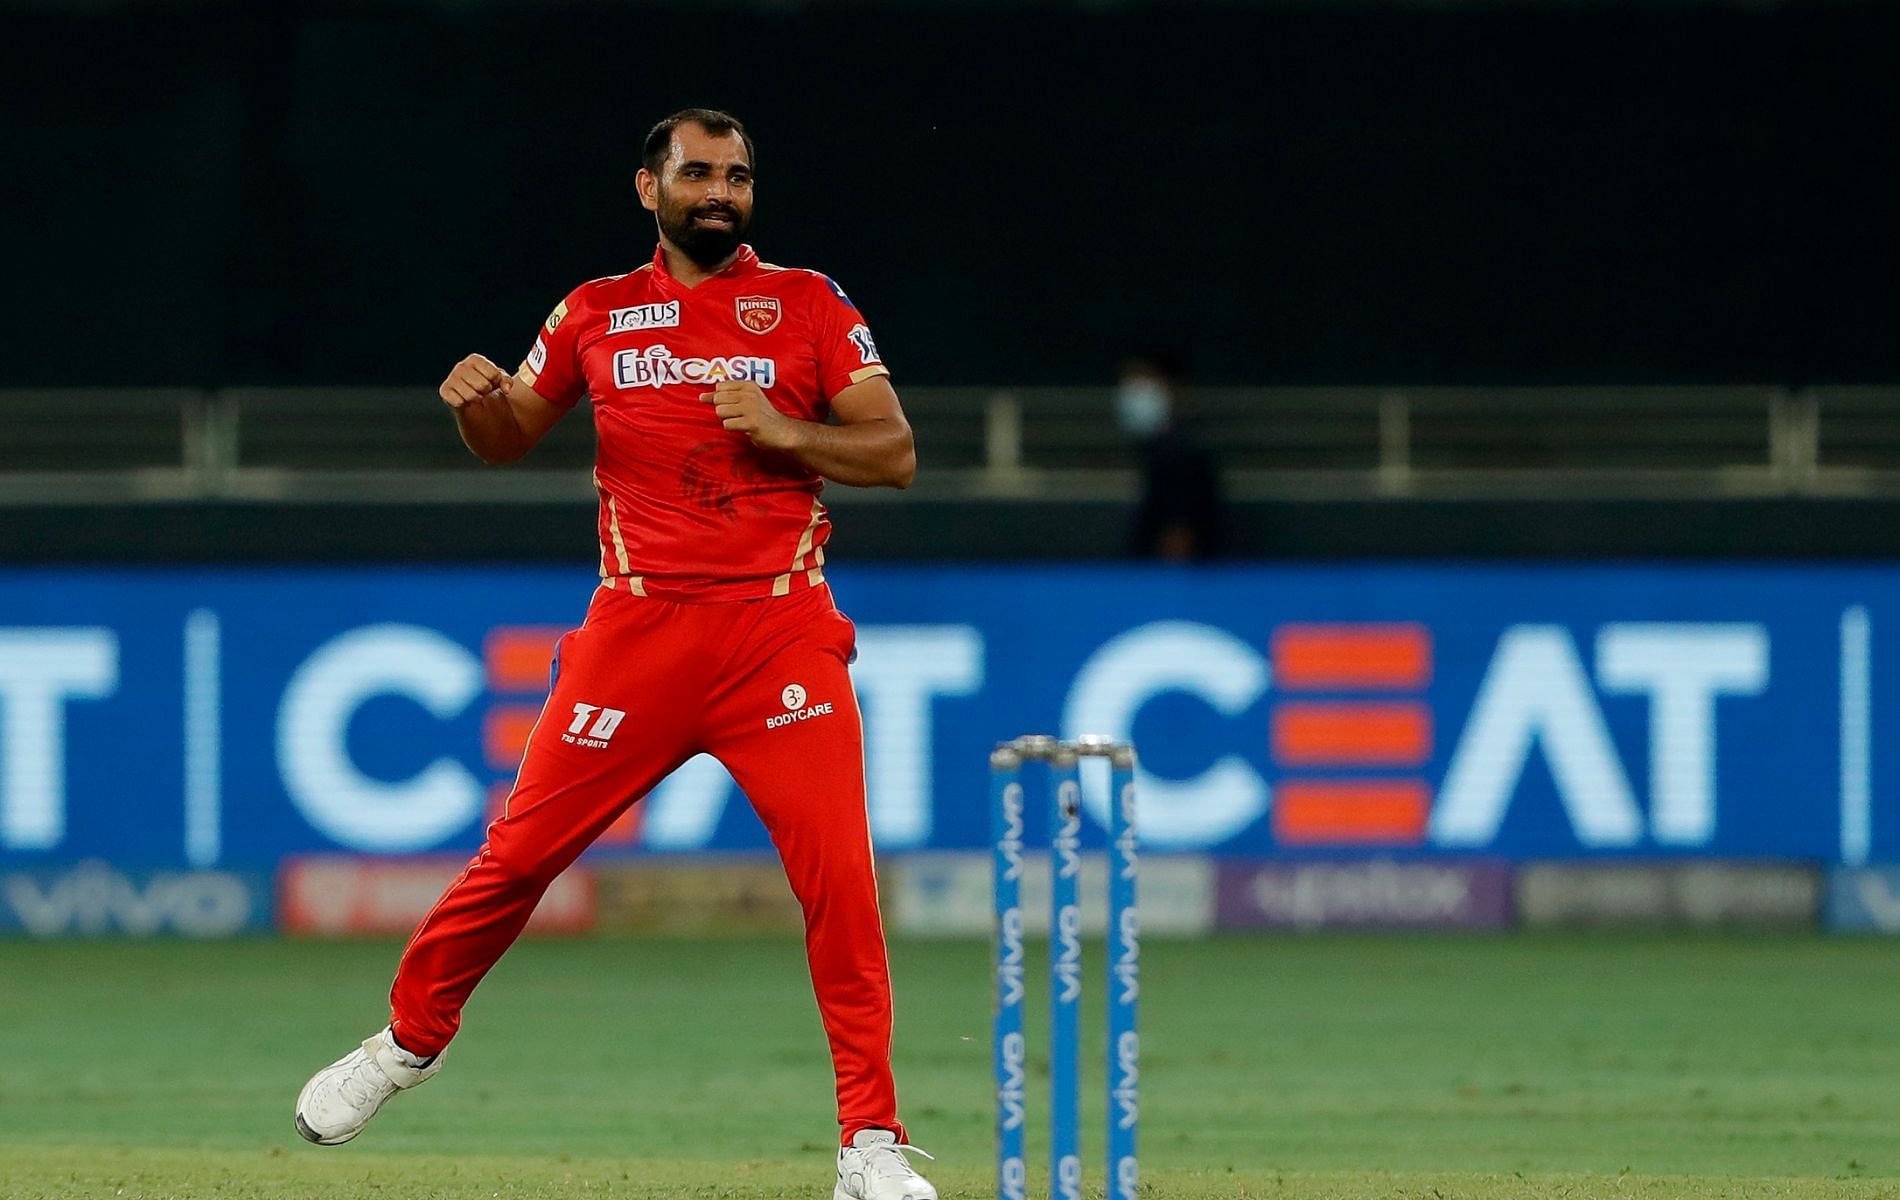 Mohammed Shami was in good wicket-taking form in IPL 2021.